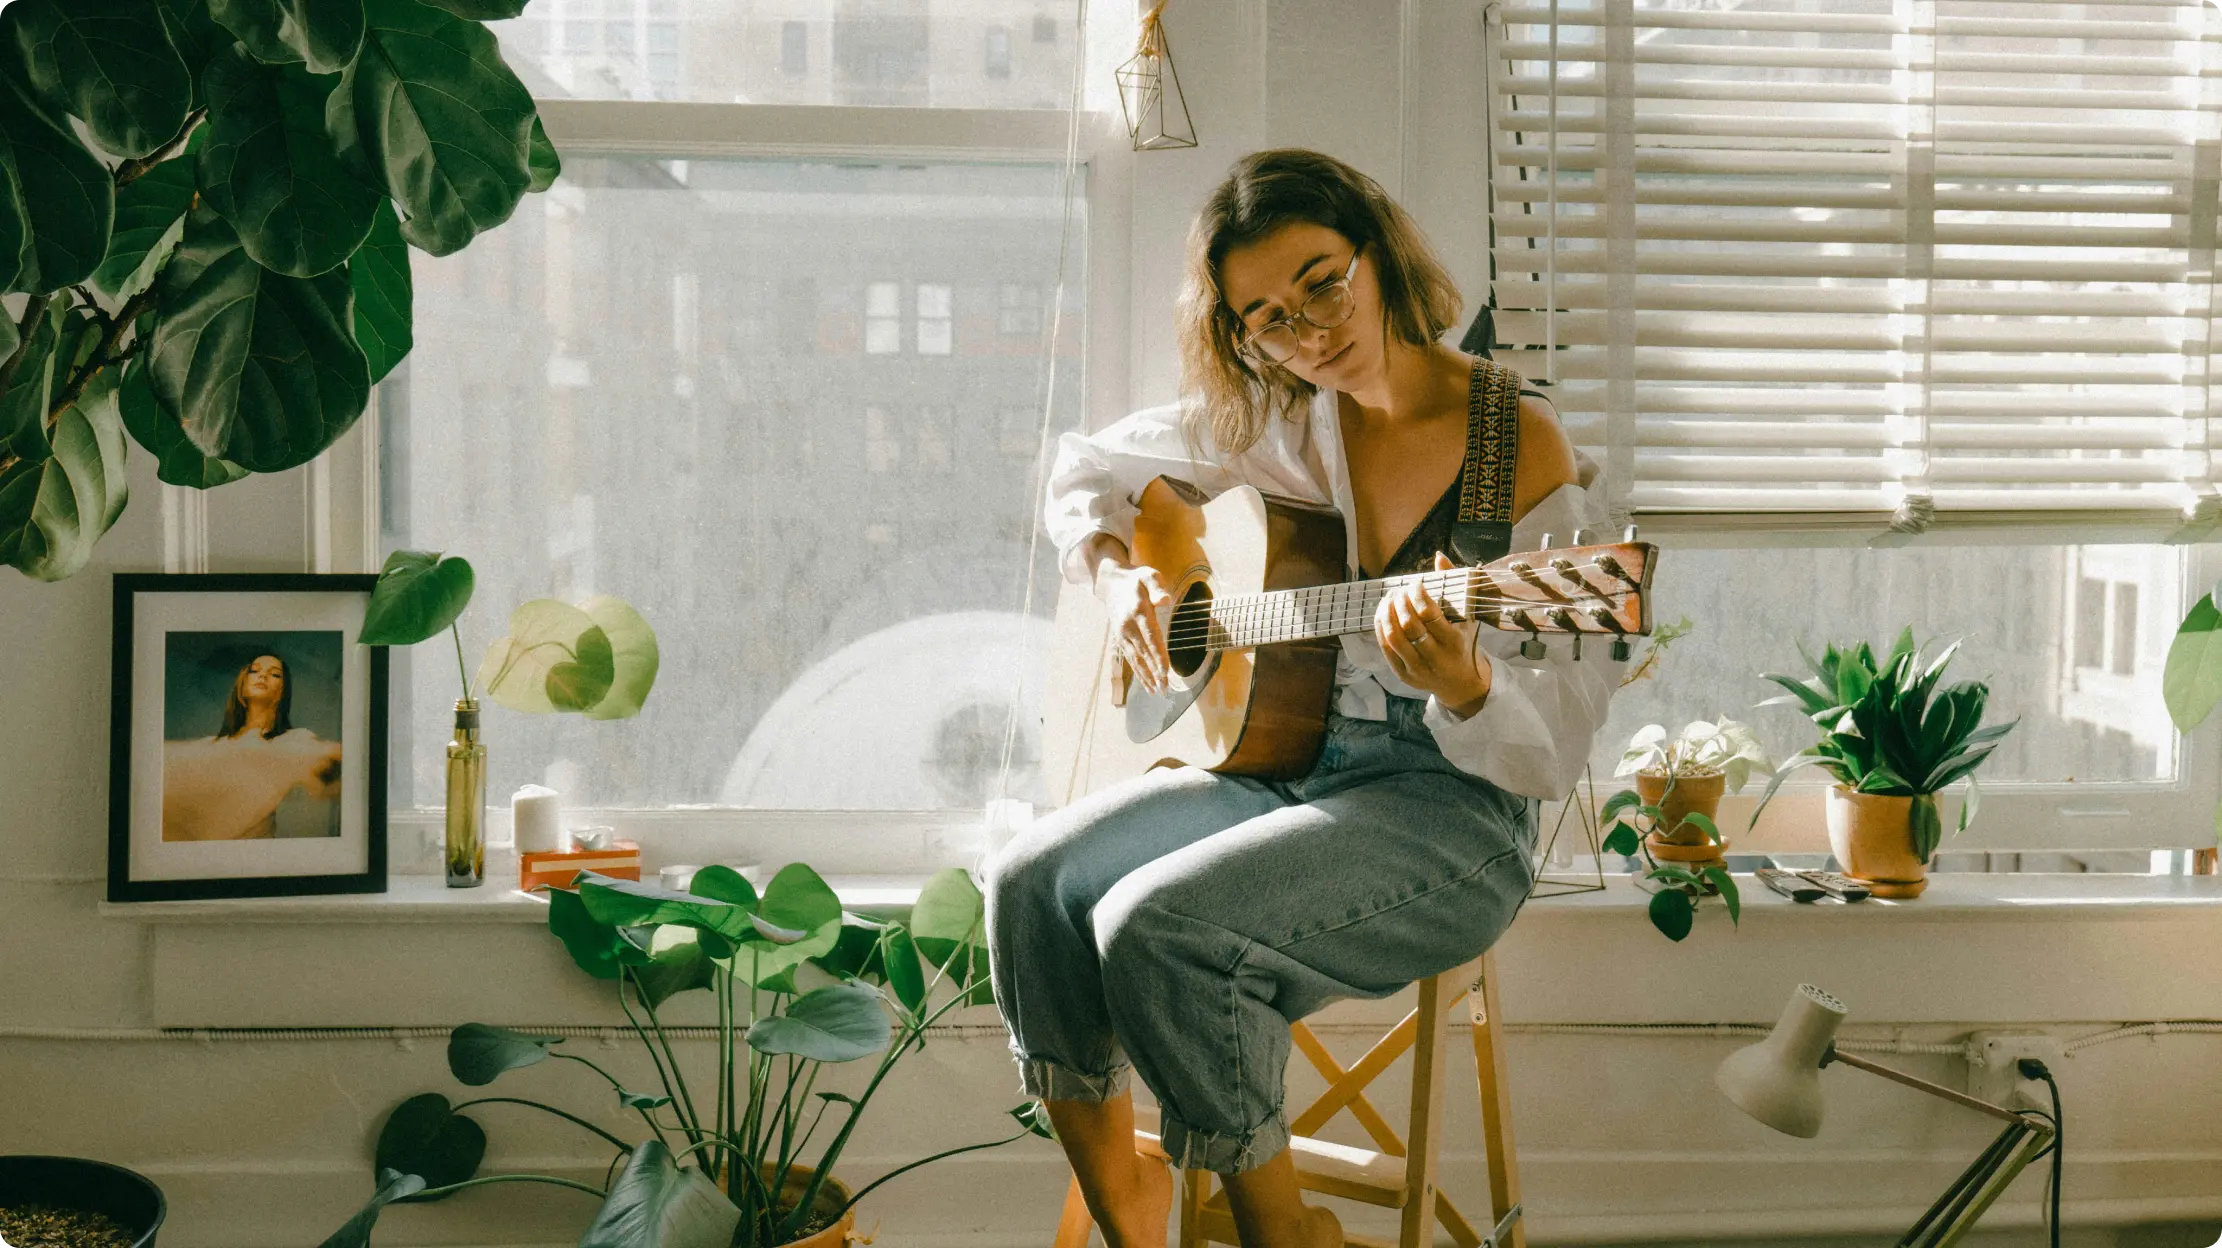 Girl playing guitar in the sunlight.